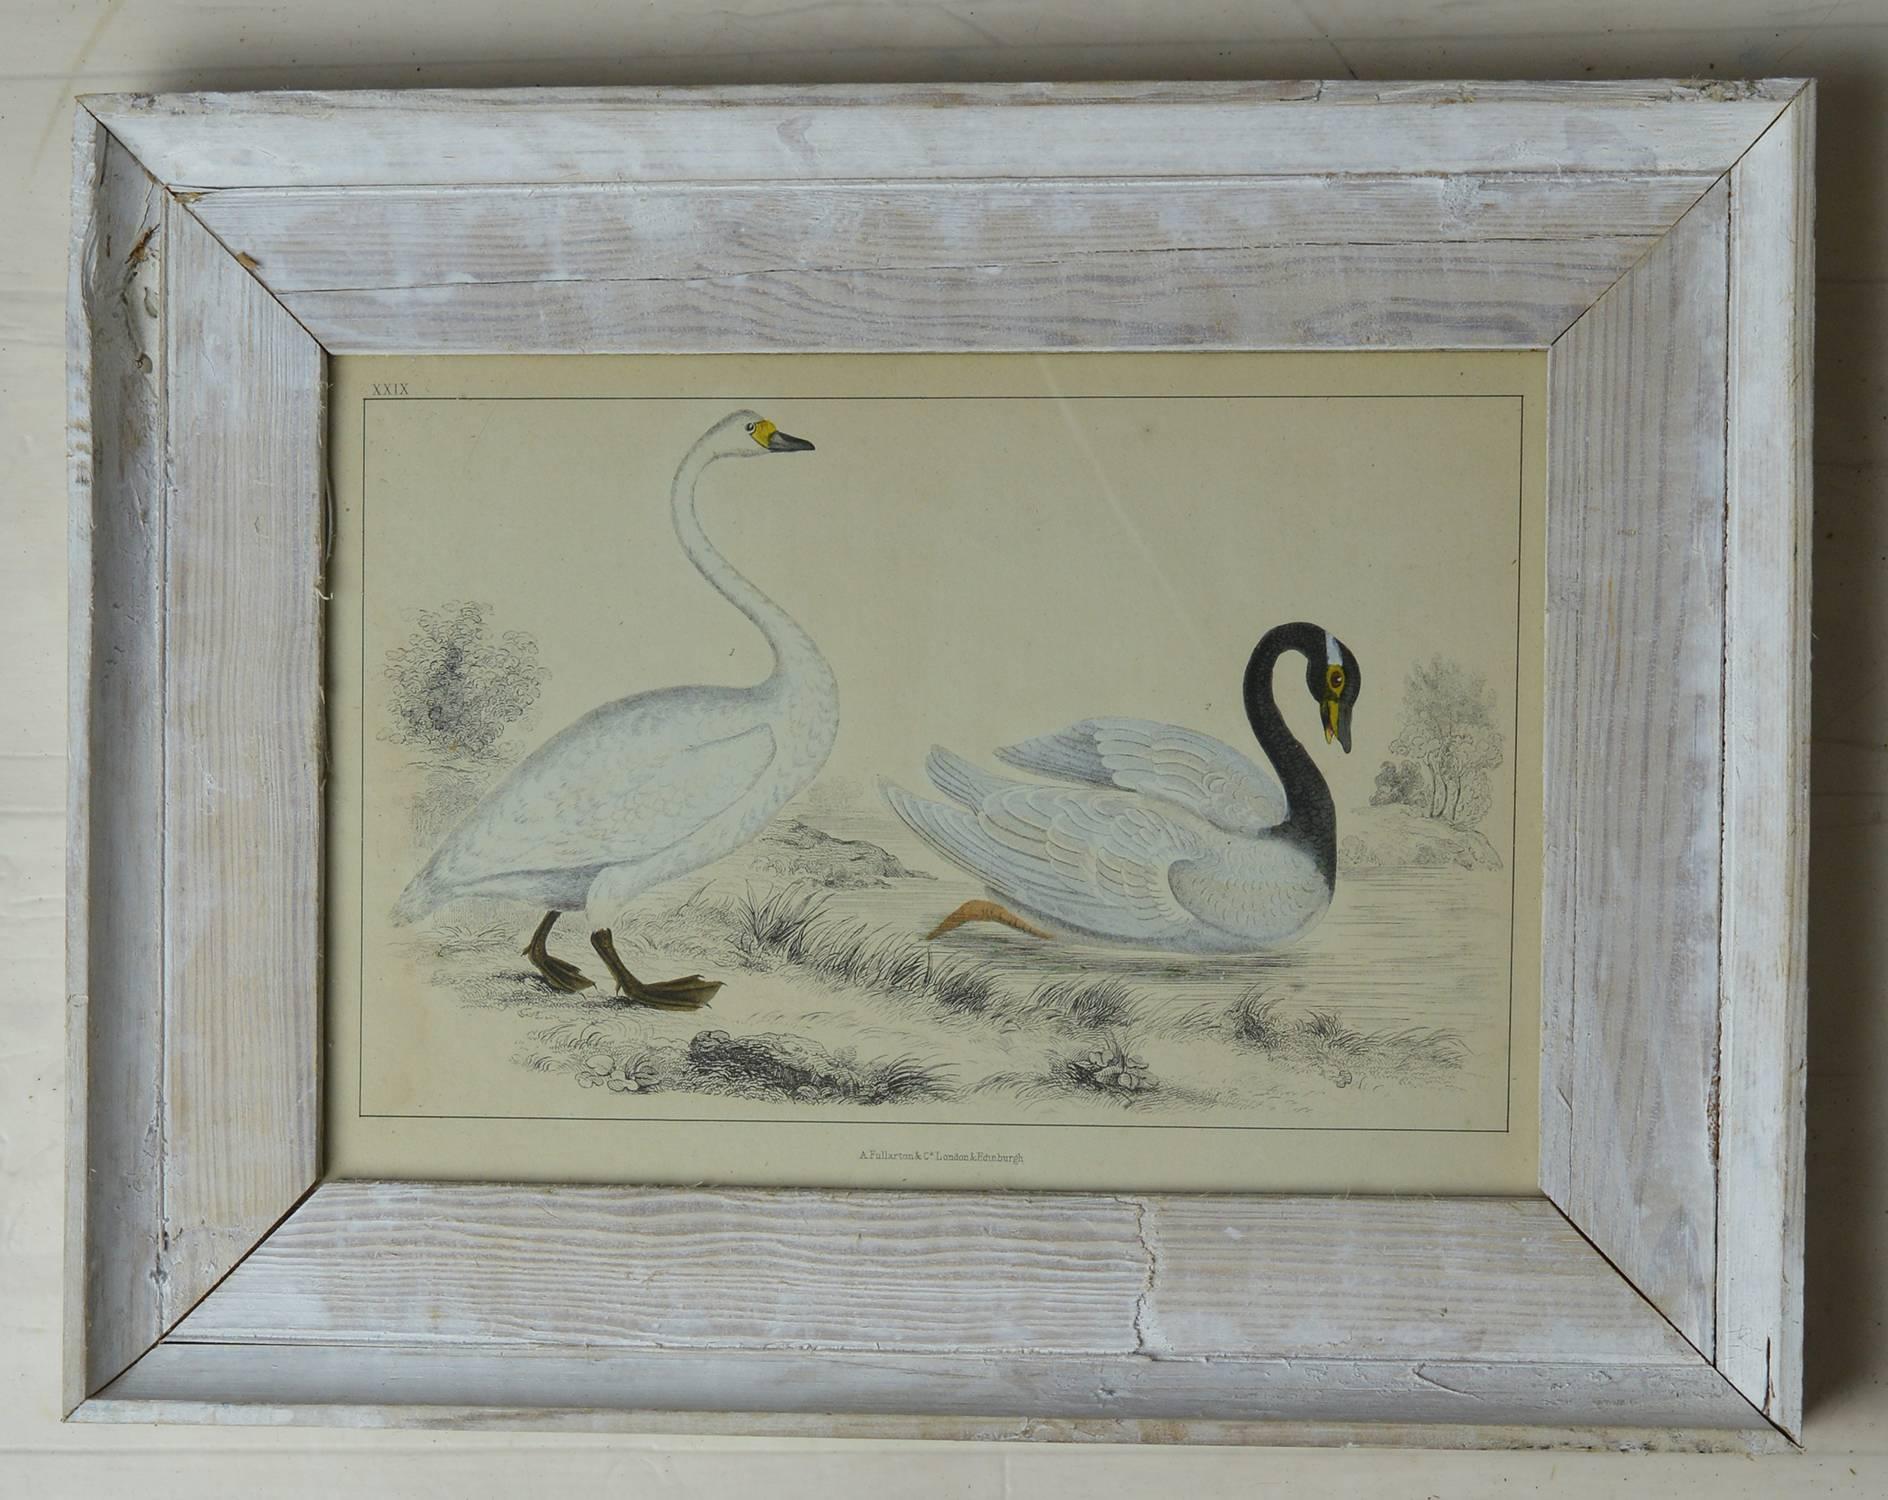 Great image of two swans.

Hand colored lithograph.

Original color.

From Goldsmith's Animated Nature

Published by Fullarton, London and Edinburgh, 1847.

Presented in a distressed antique painted pine frame.

The measurement given below is the